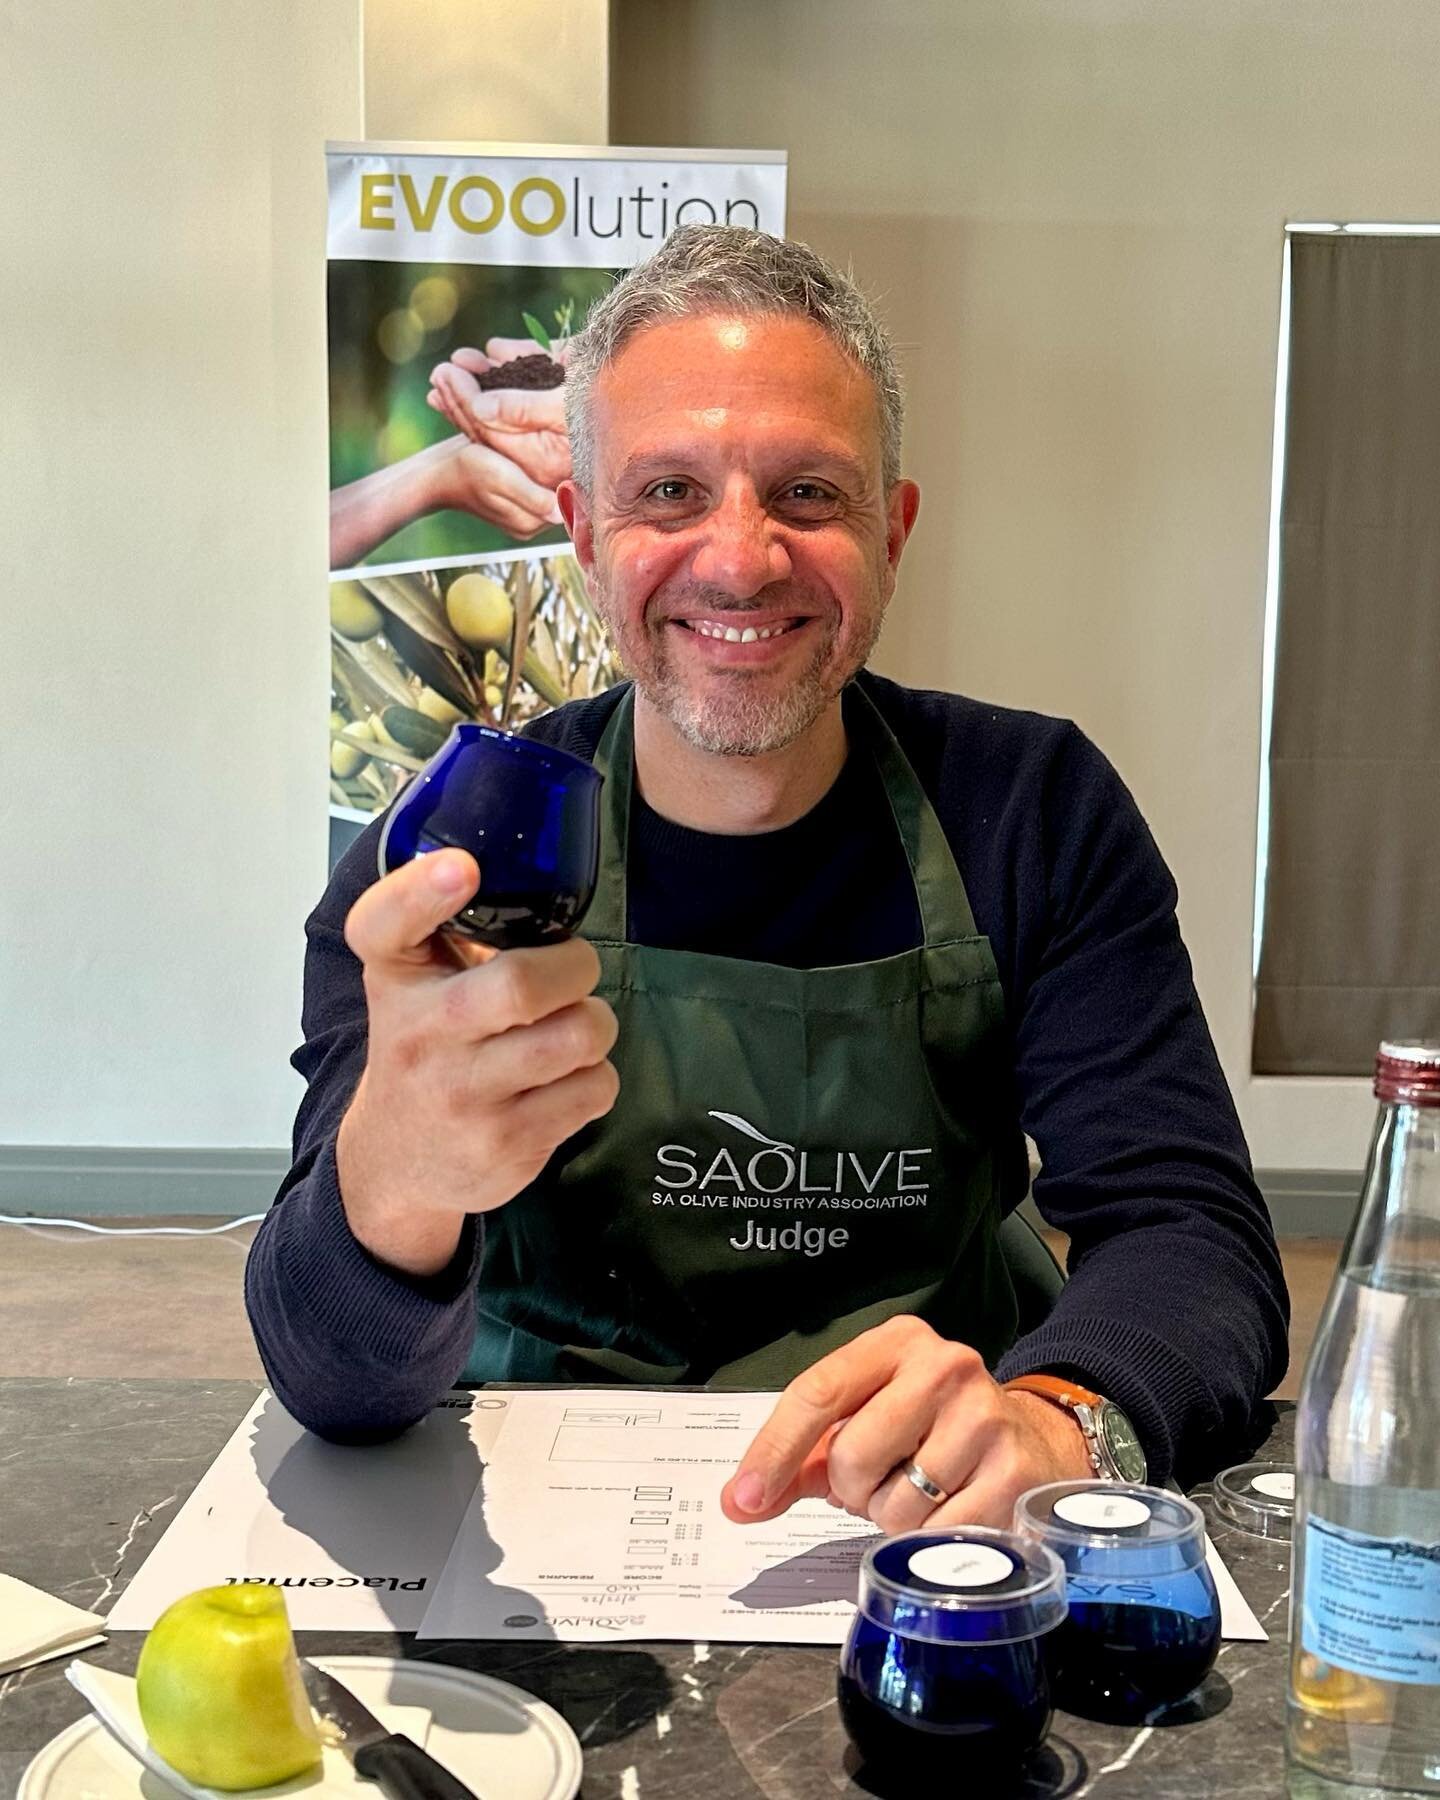 Immensely honoured and grateful to have been chosen as one of two international tasters for the 2023 @saoliveindustry awards. 

As part of a distinguished panel we spent five intense days on blind and double-blind tastings, striving to highlight the 